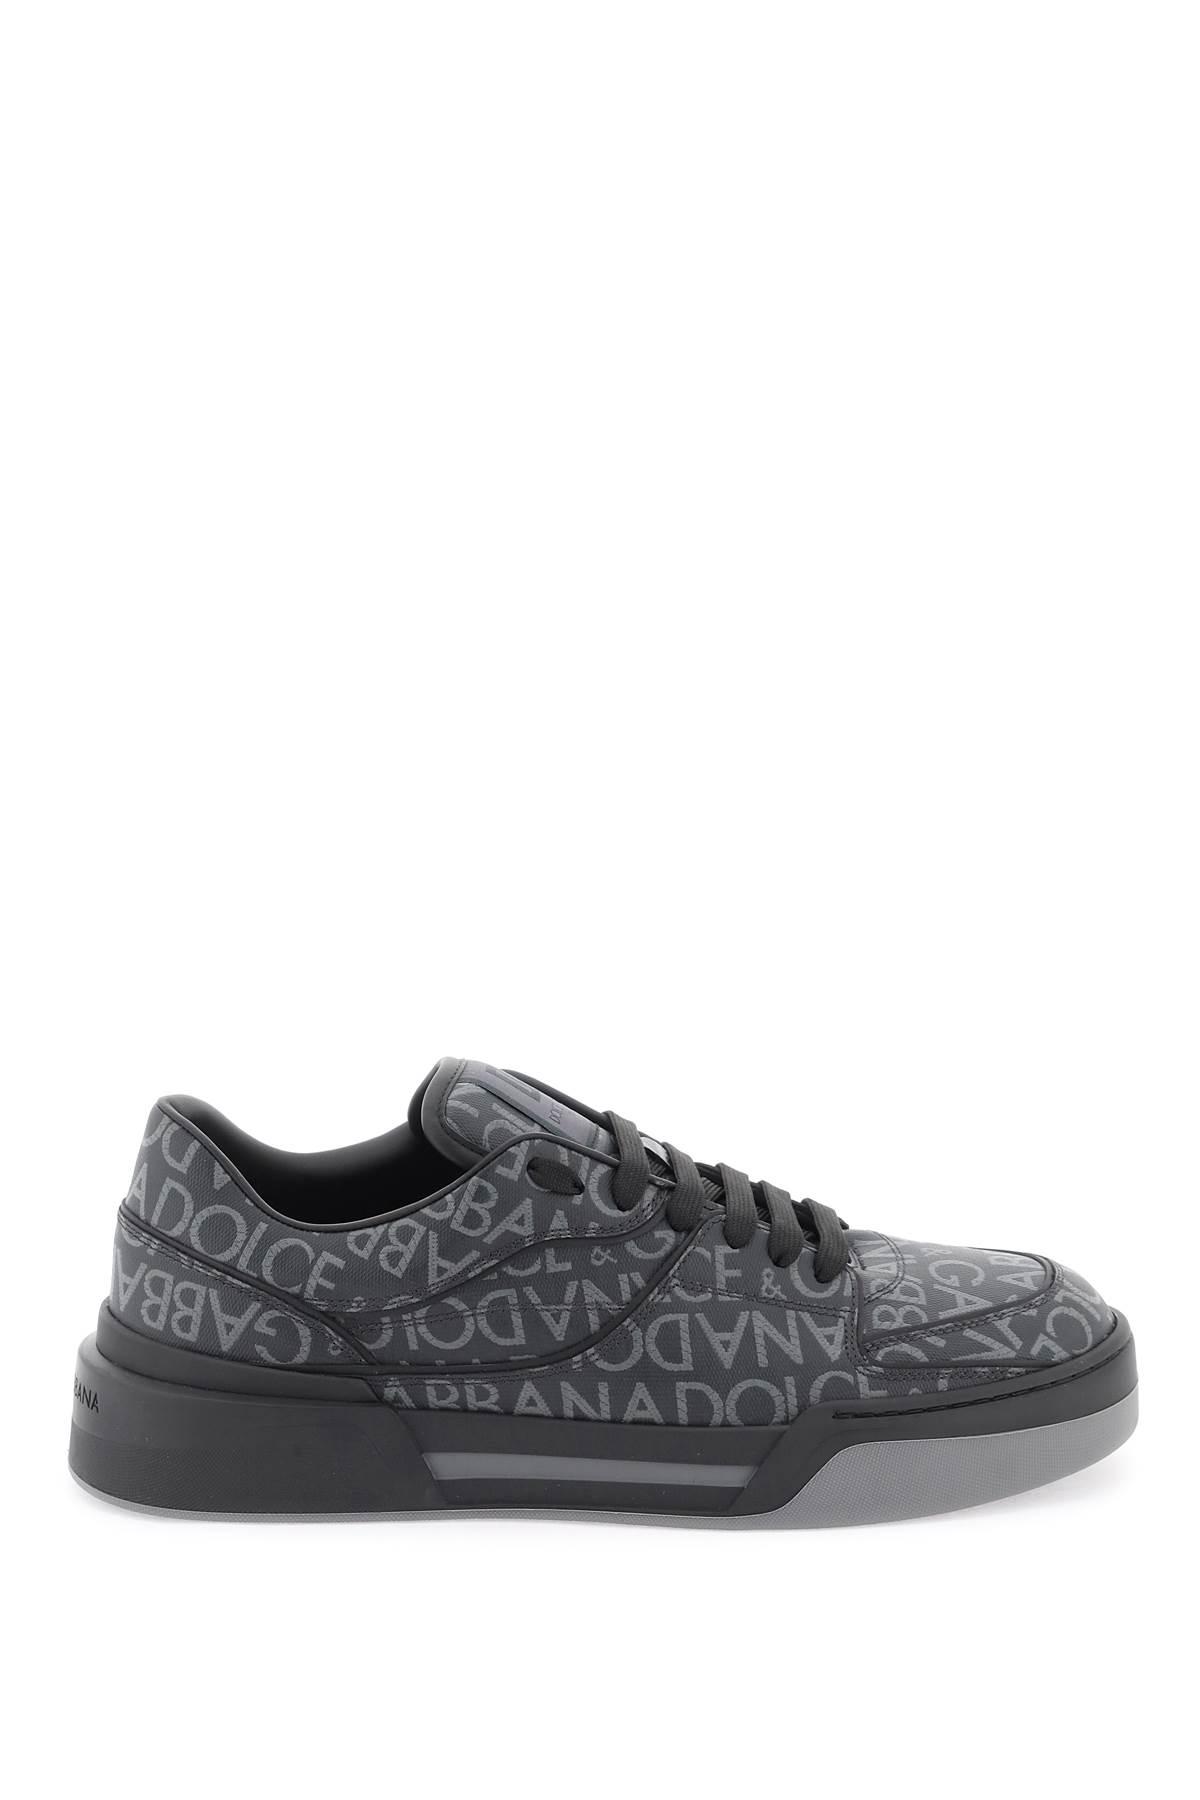 DOLCE & GABBANA 'New Roma' sneakers